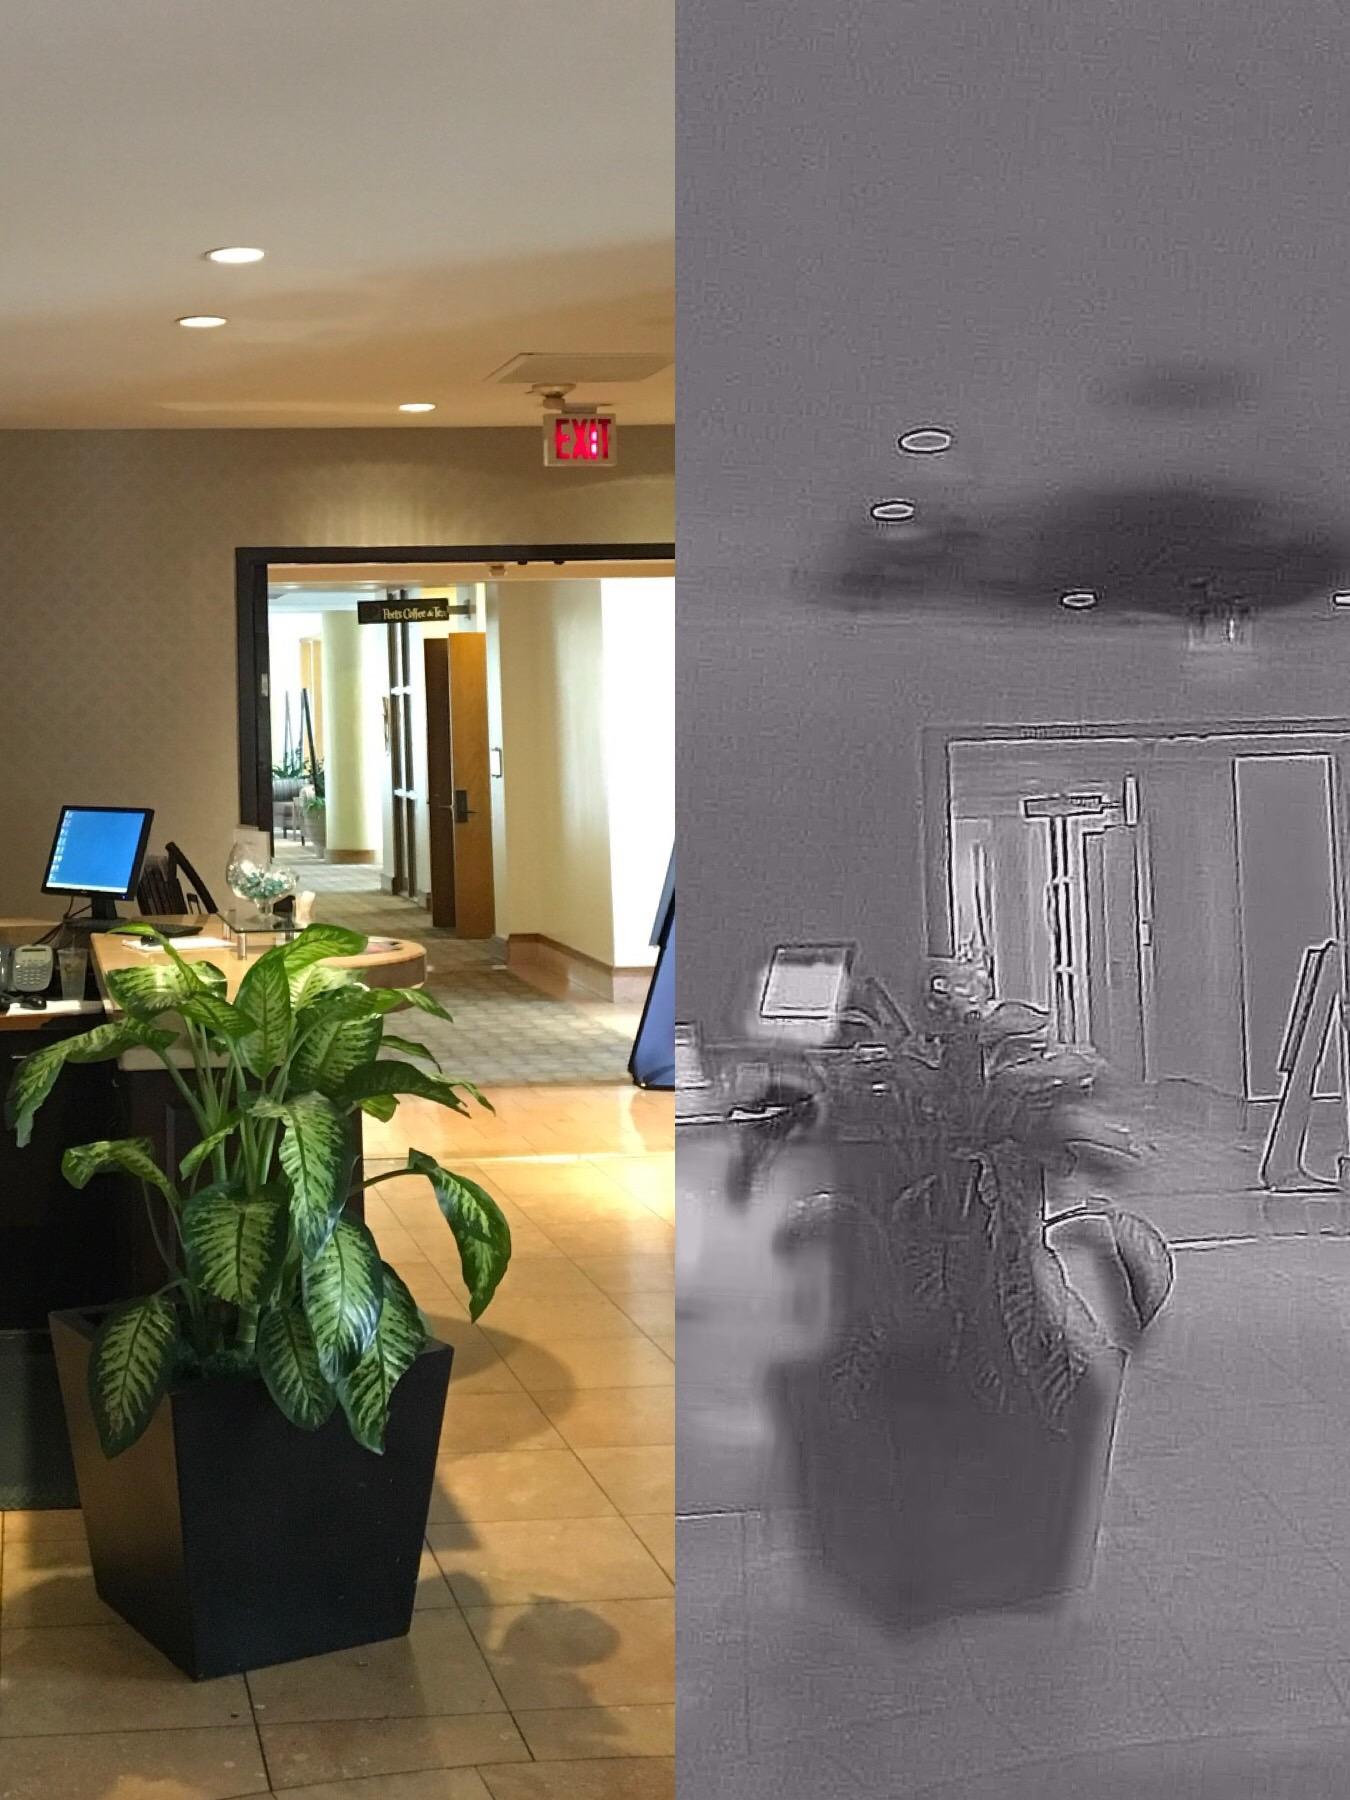 Using our thermal cameras to check for moisture after a commercial loss.